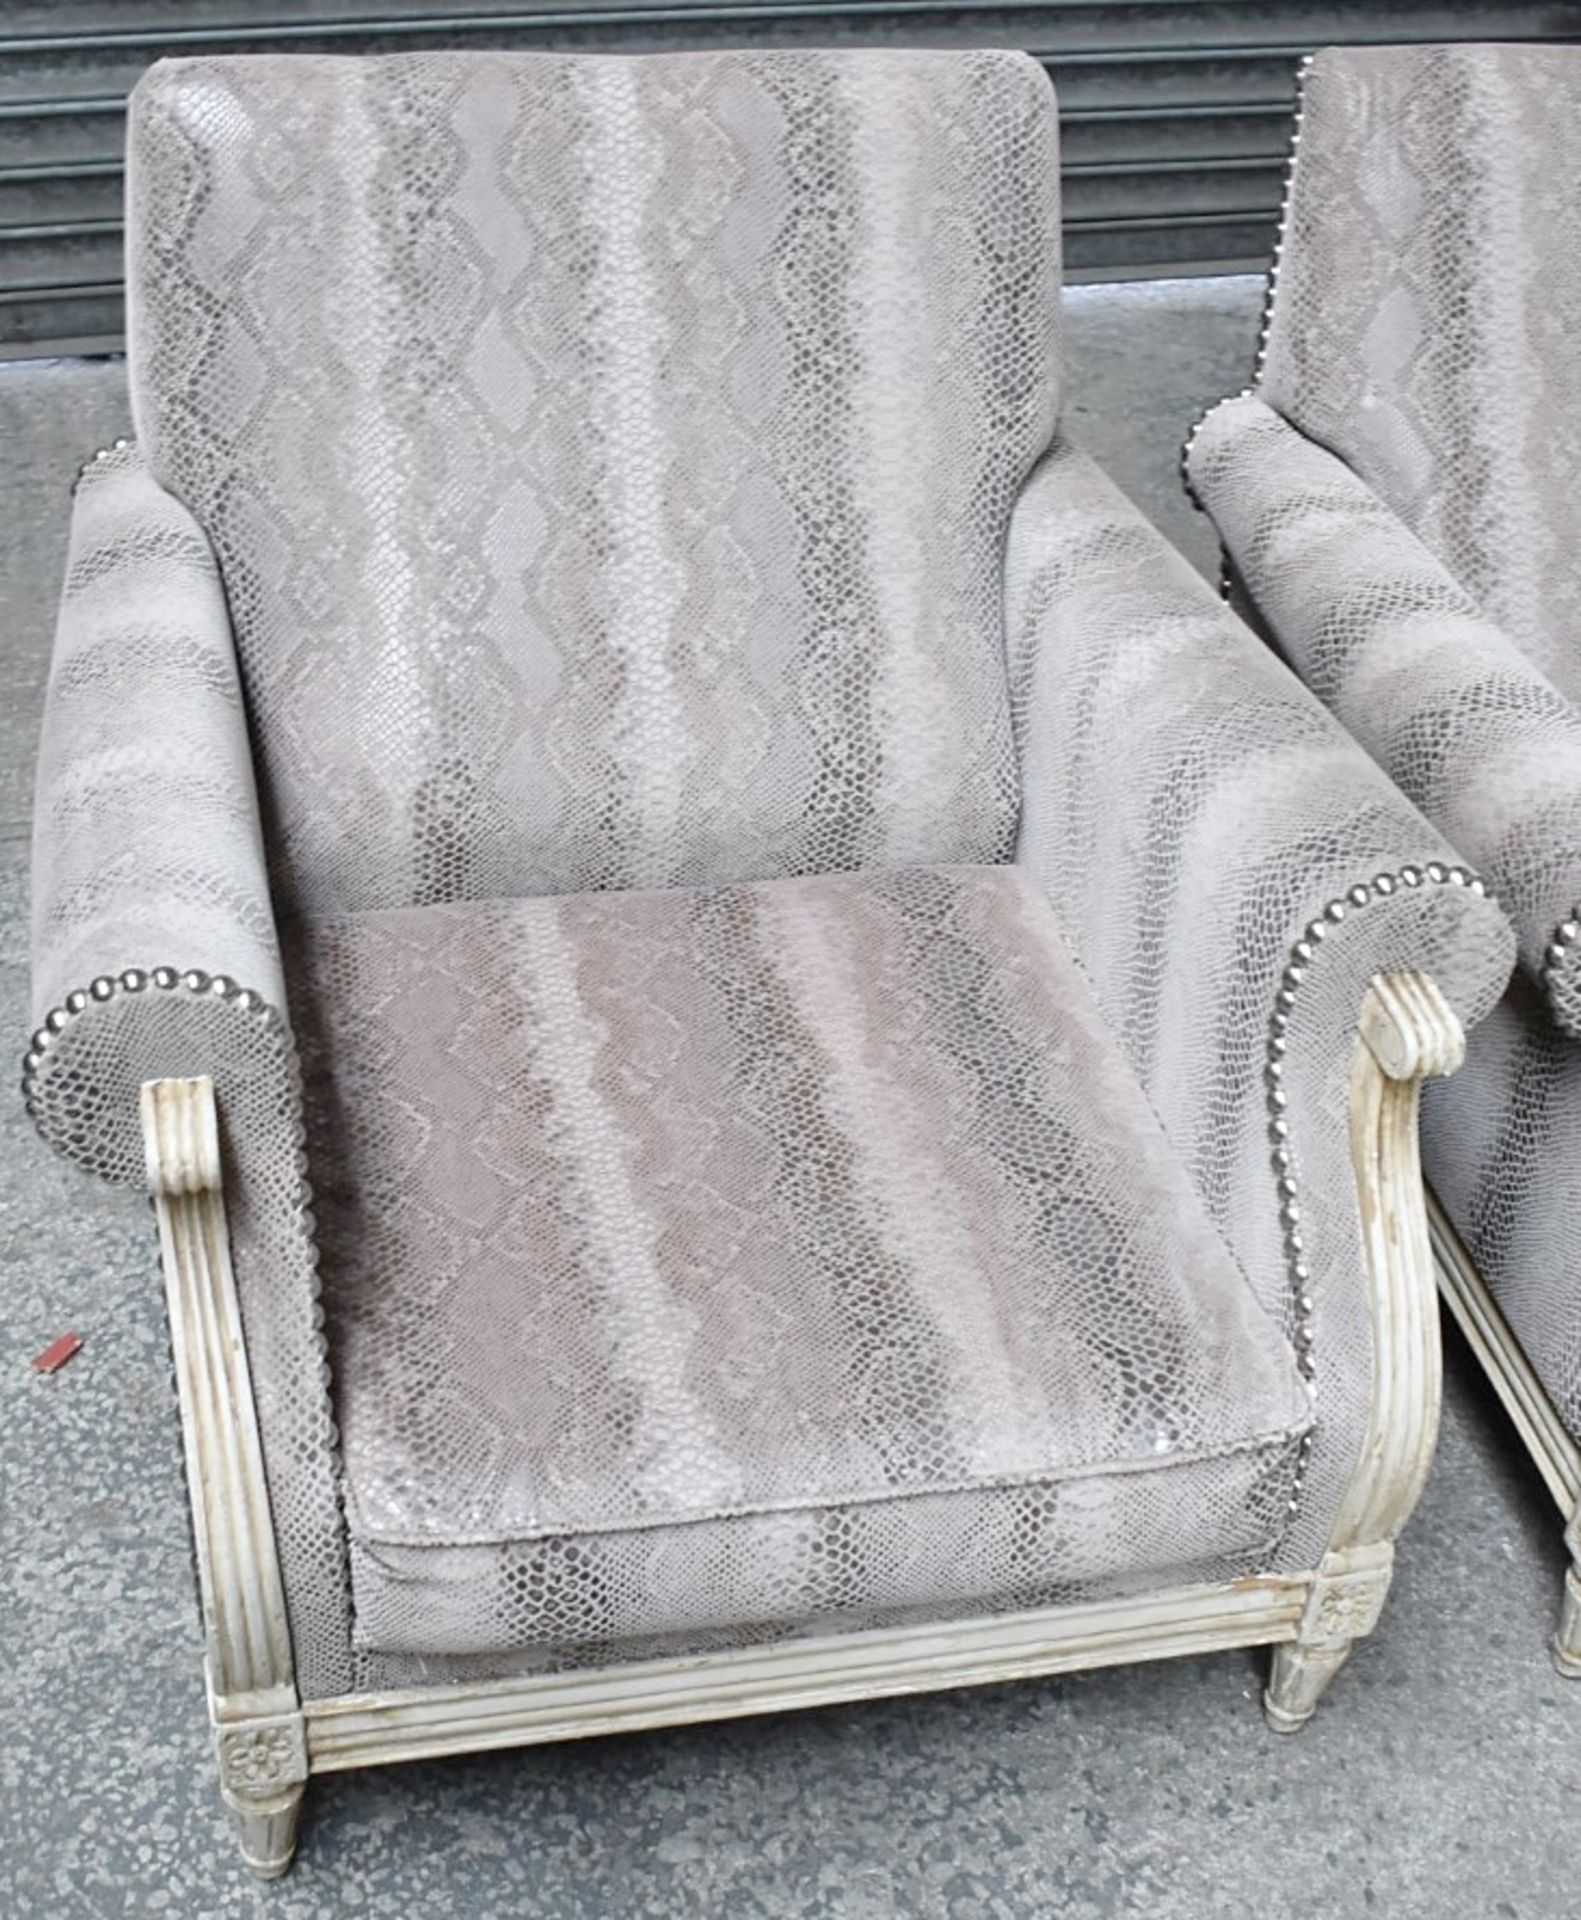 A Pair Of Bespoke Armchairs With A Matching Foot-stool, All Featuring Carved Frames, And Upholstered - Image 3 of 7